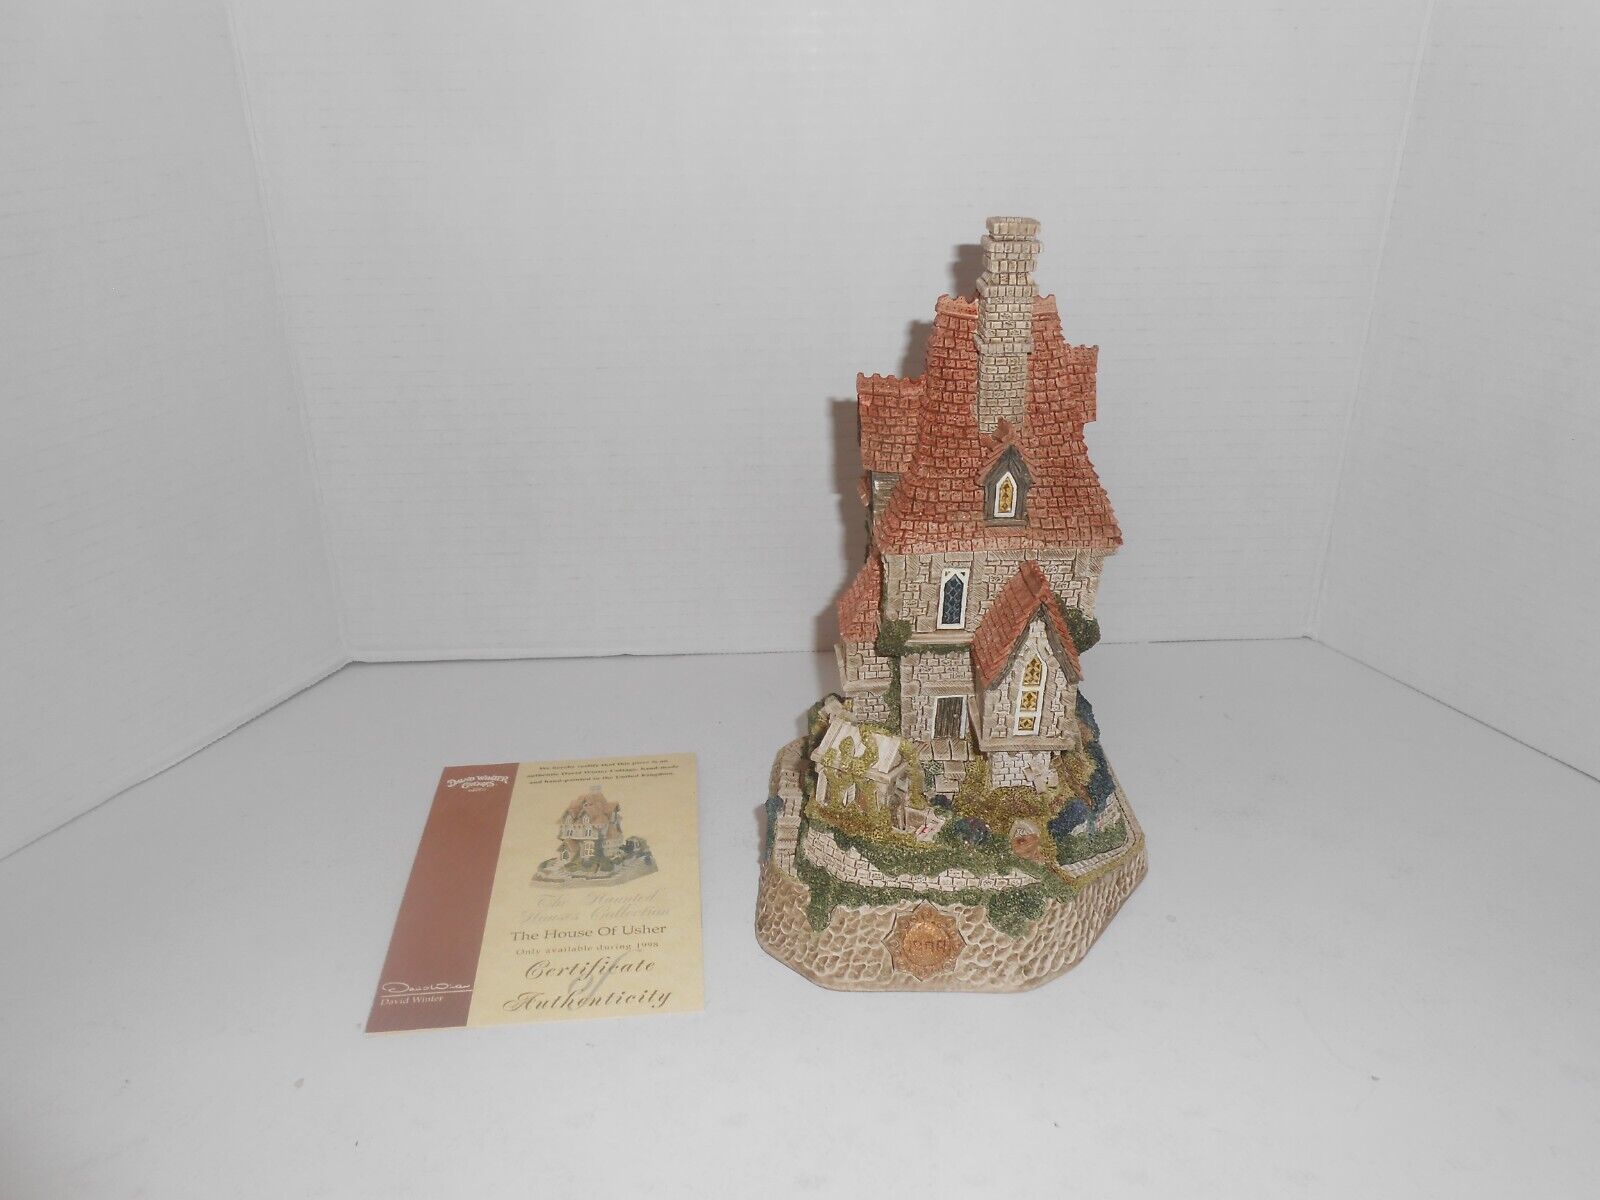 David Winter The House of Usher by Enesco w/key and COA and signed